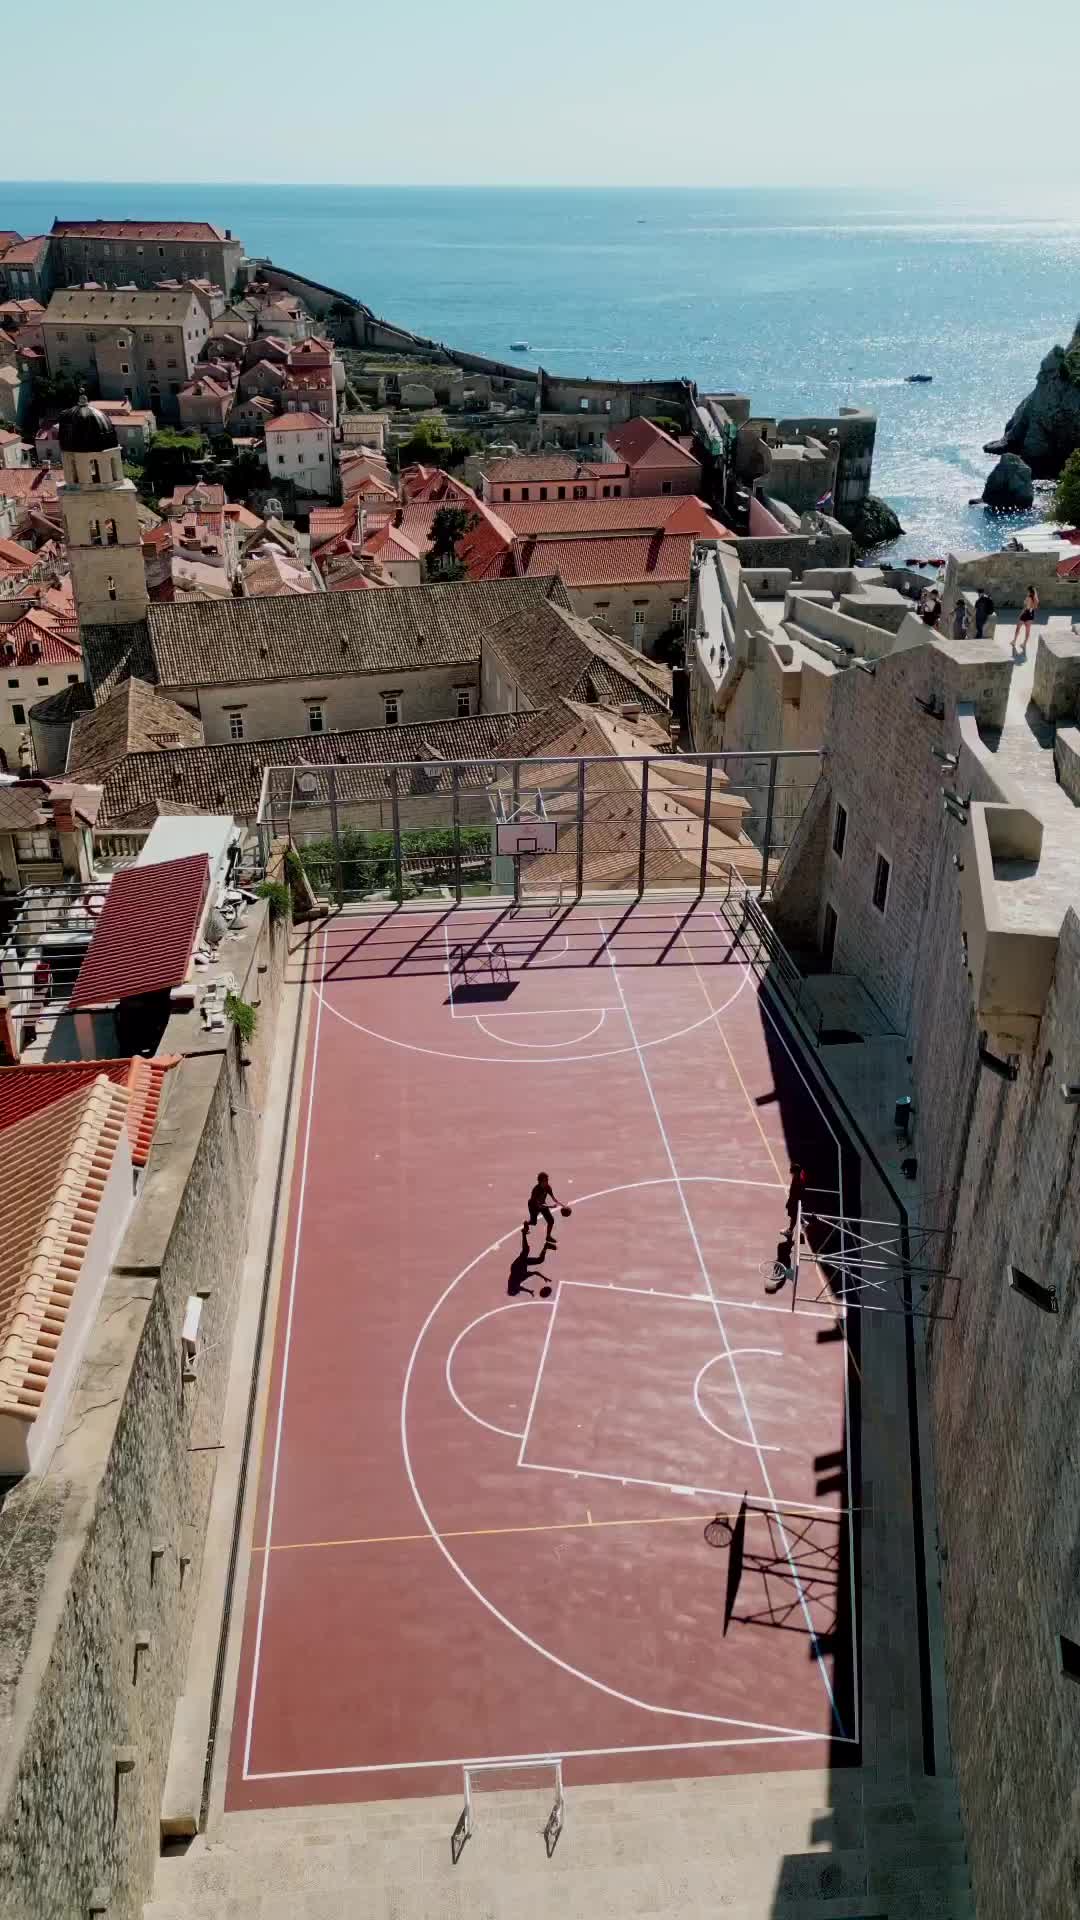 Discover Dubrovnik's Stunning Rooftop Basketball Court